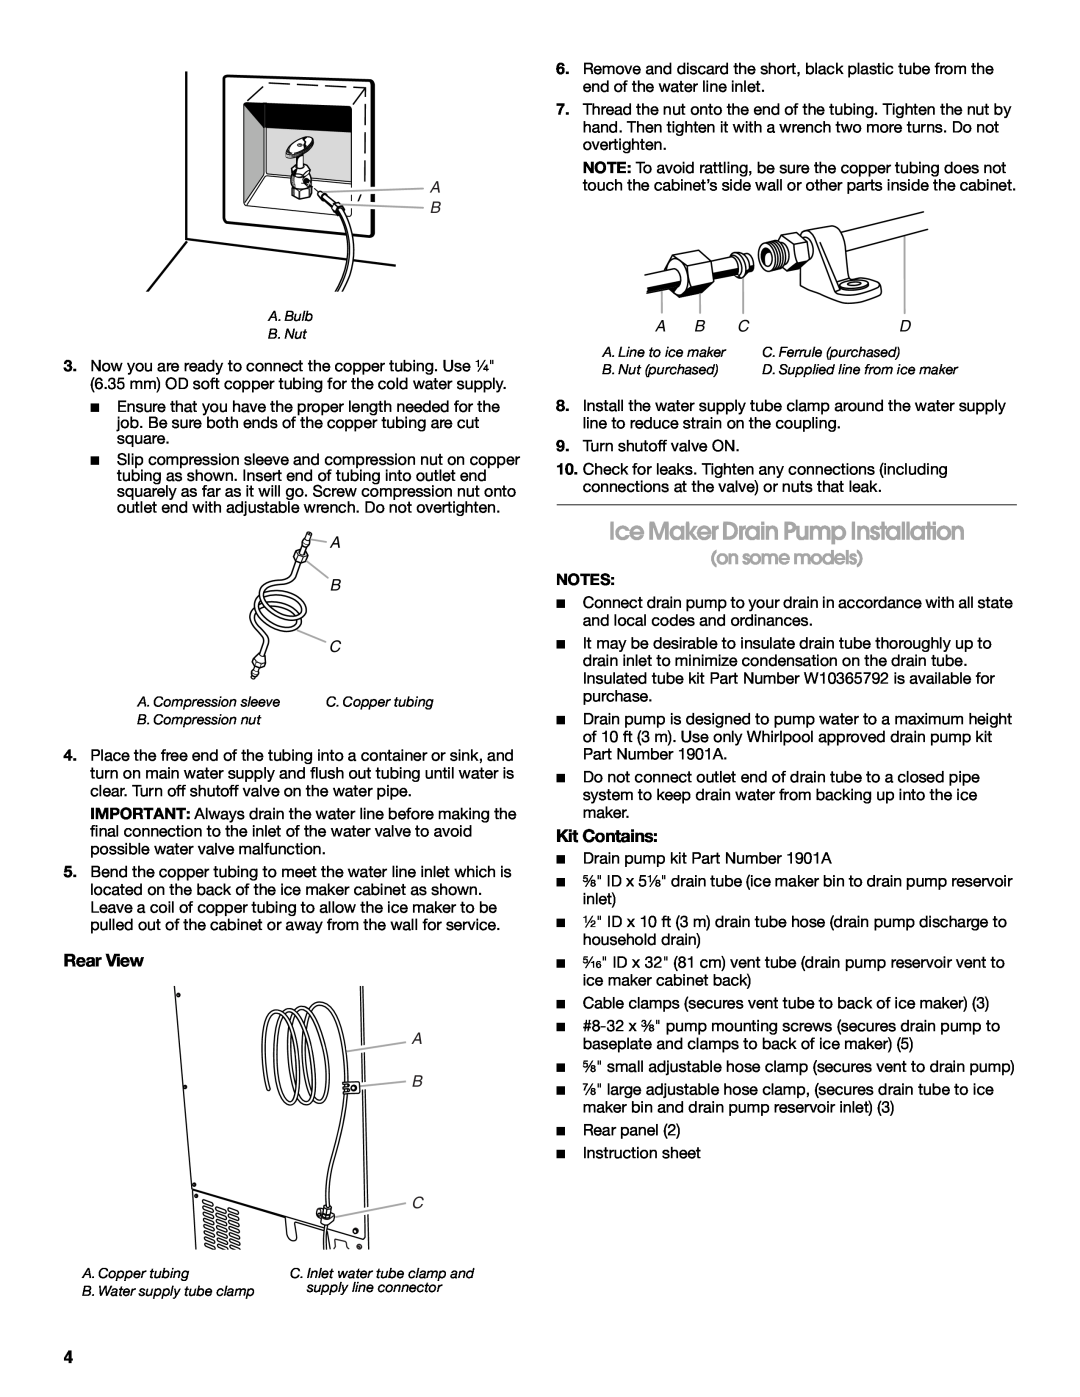 Whirlpool W10541636B Ice Maker Drain Pump Installation, on some models, Rear View, Kit Contains, A B C 